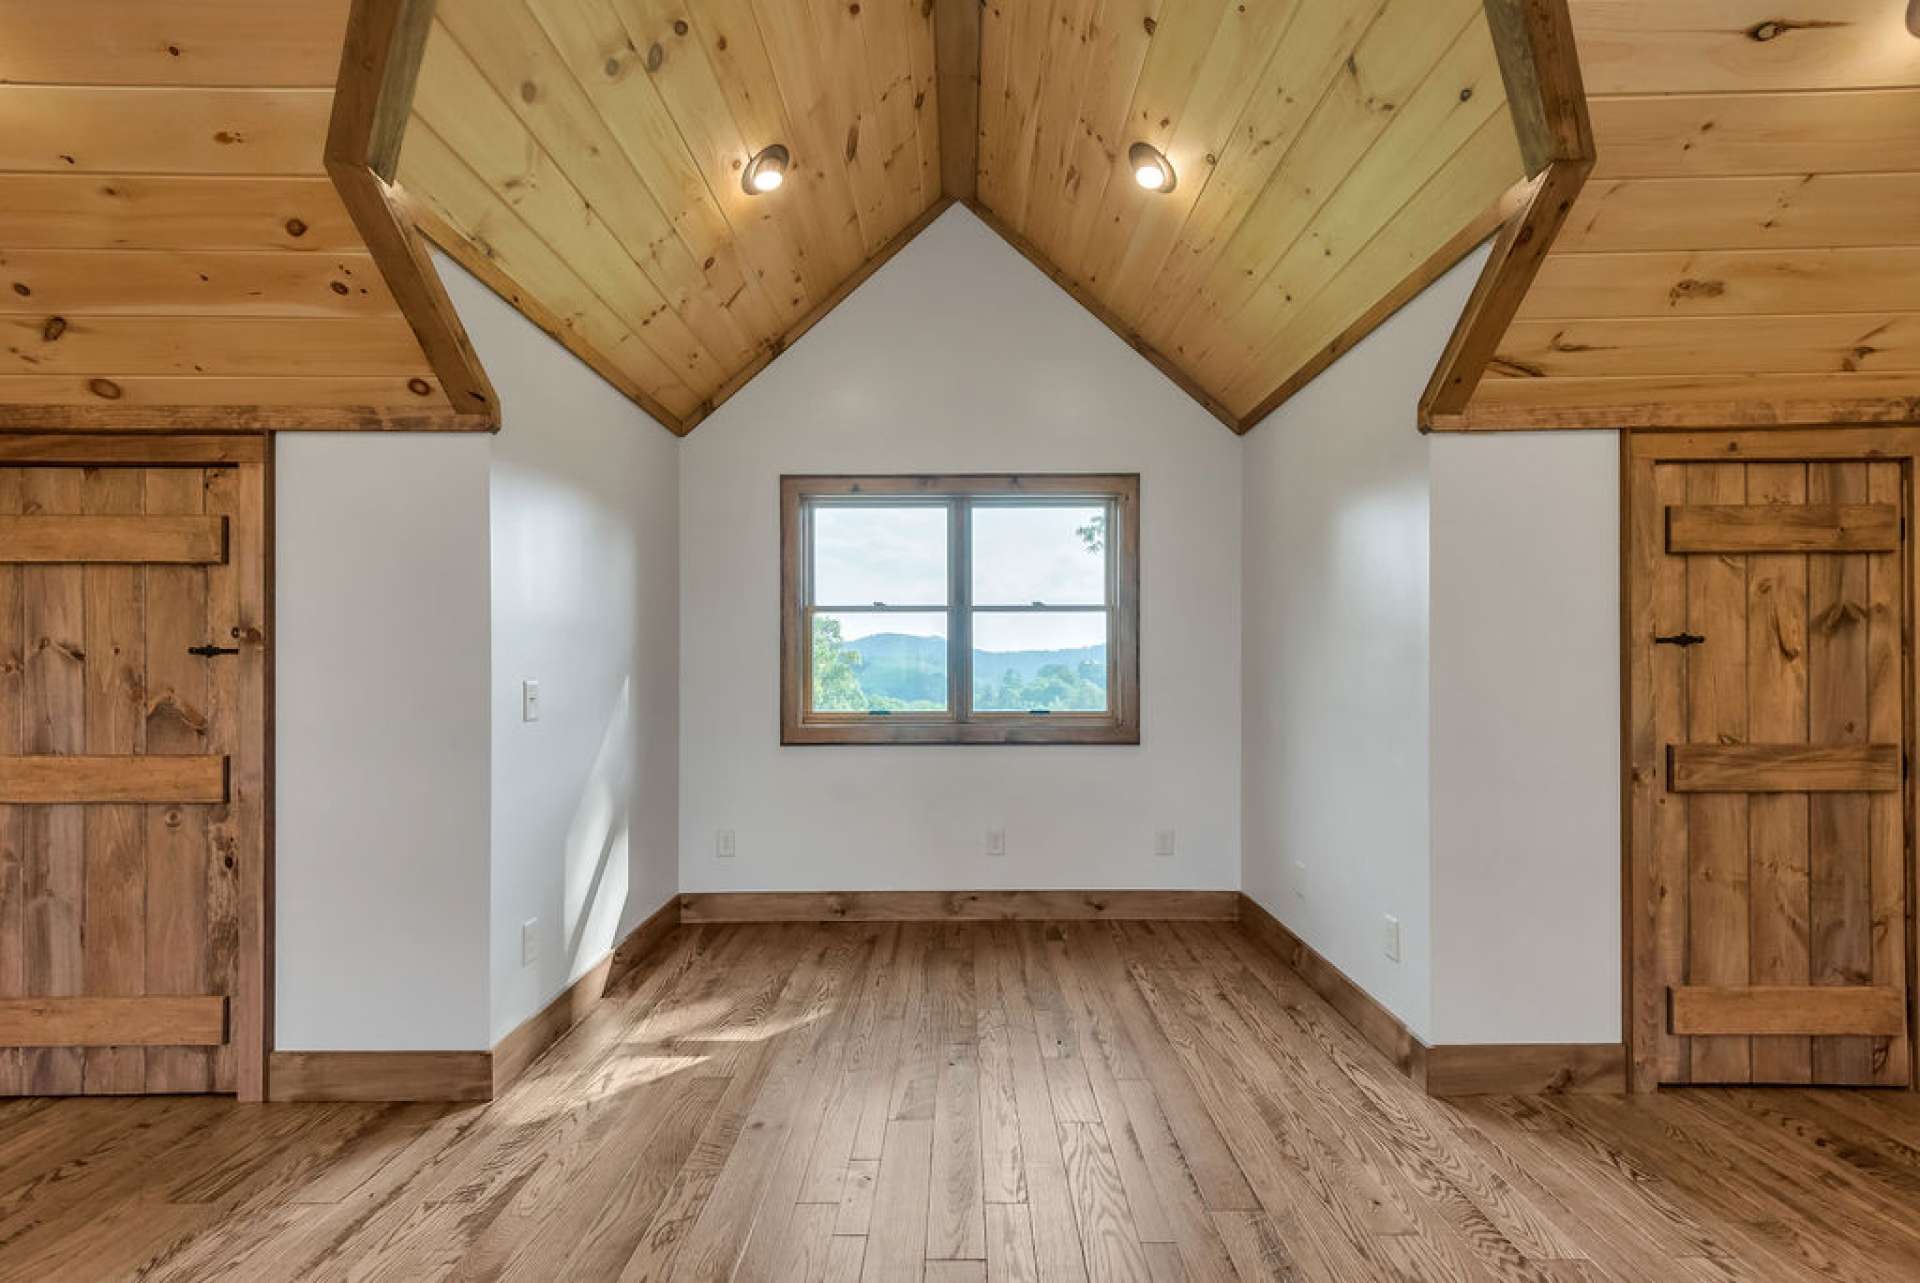 The loft windows provide the view of the adjoining Christmas tree farm.